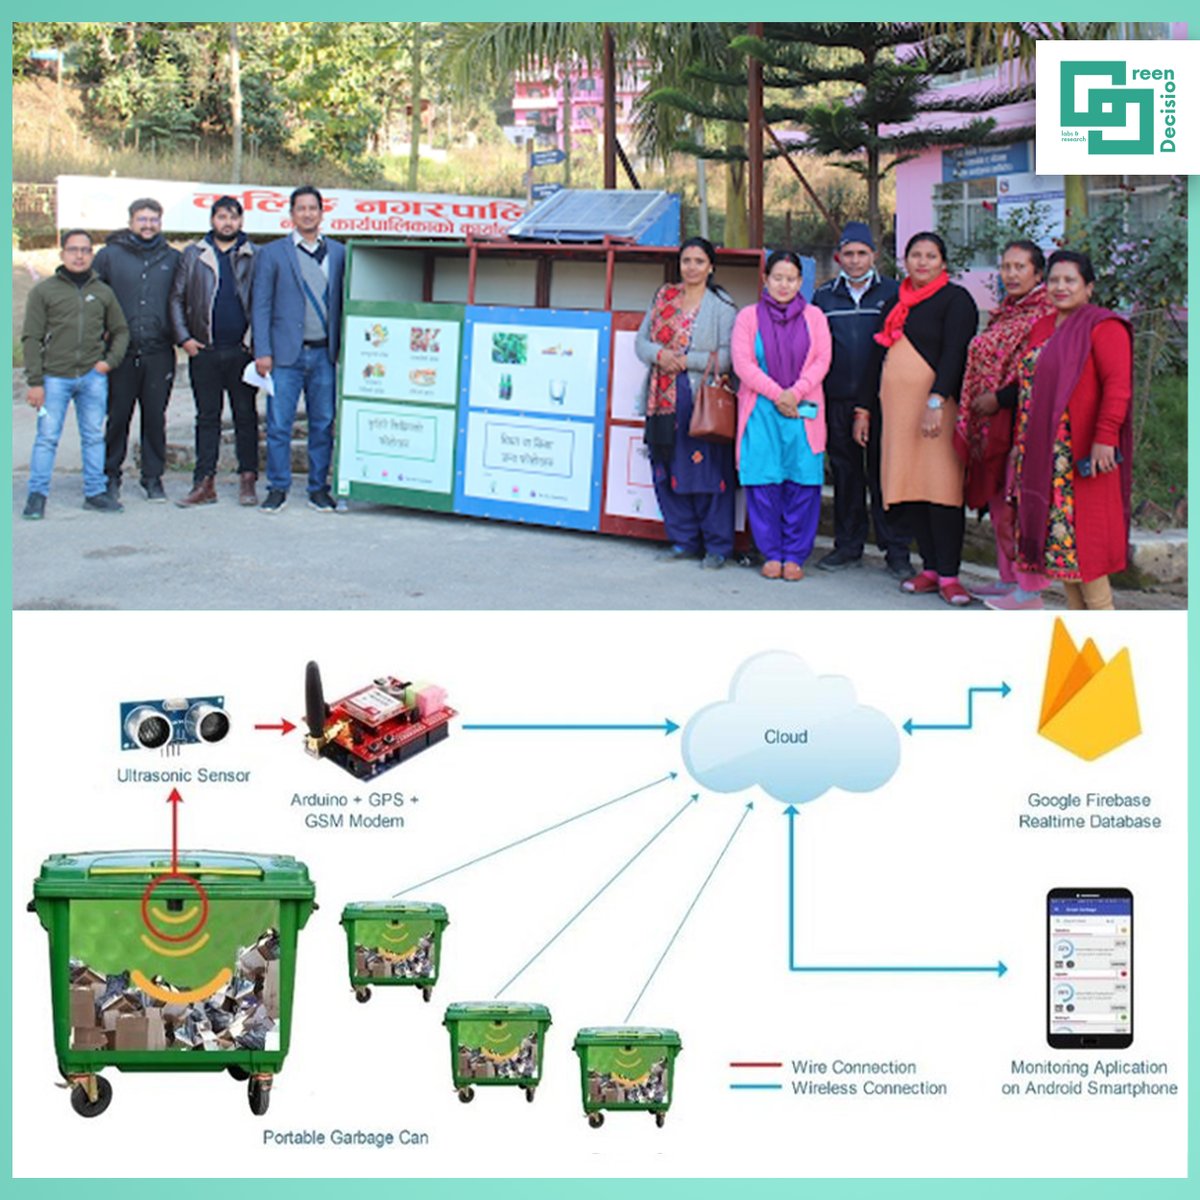 अब Bins पनी Smart बन्दै!

#Bins #SmartBins #IoT #IoTtechnology #Technology #Innovation #Waste #WasteManagement #Sustainability #GDLabs #GDLabsAndResearch #GreenDecisionLabs #GreenDecisionLabsAndResearch